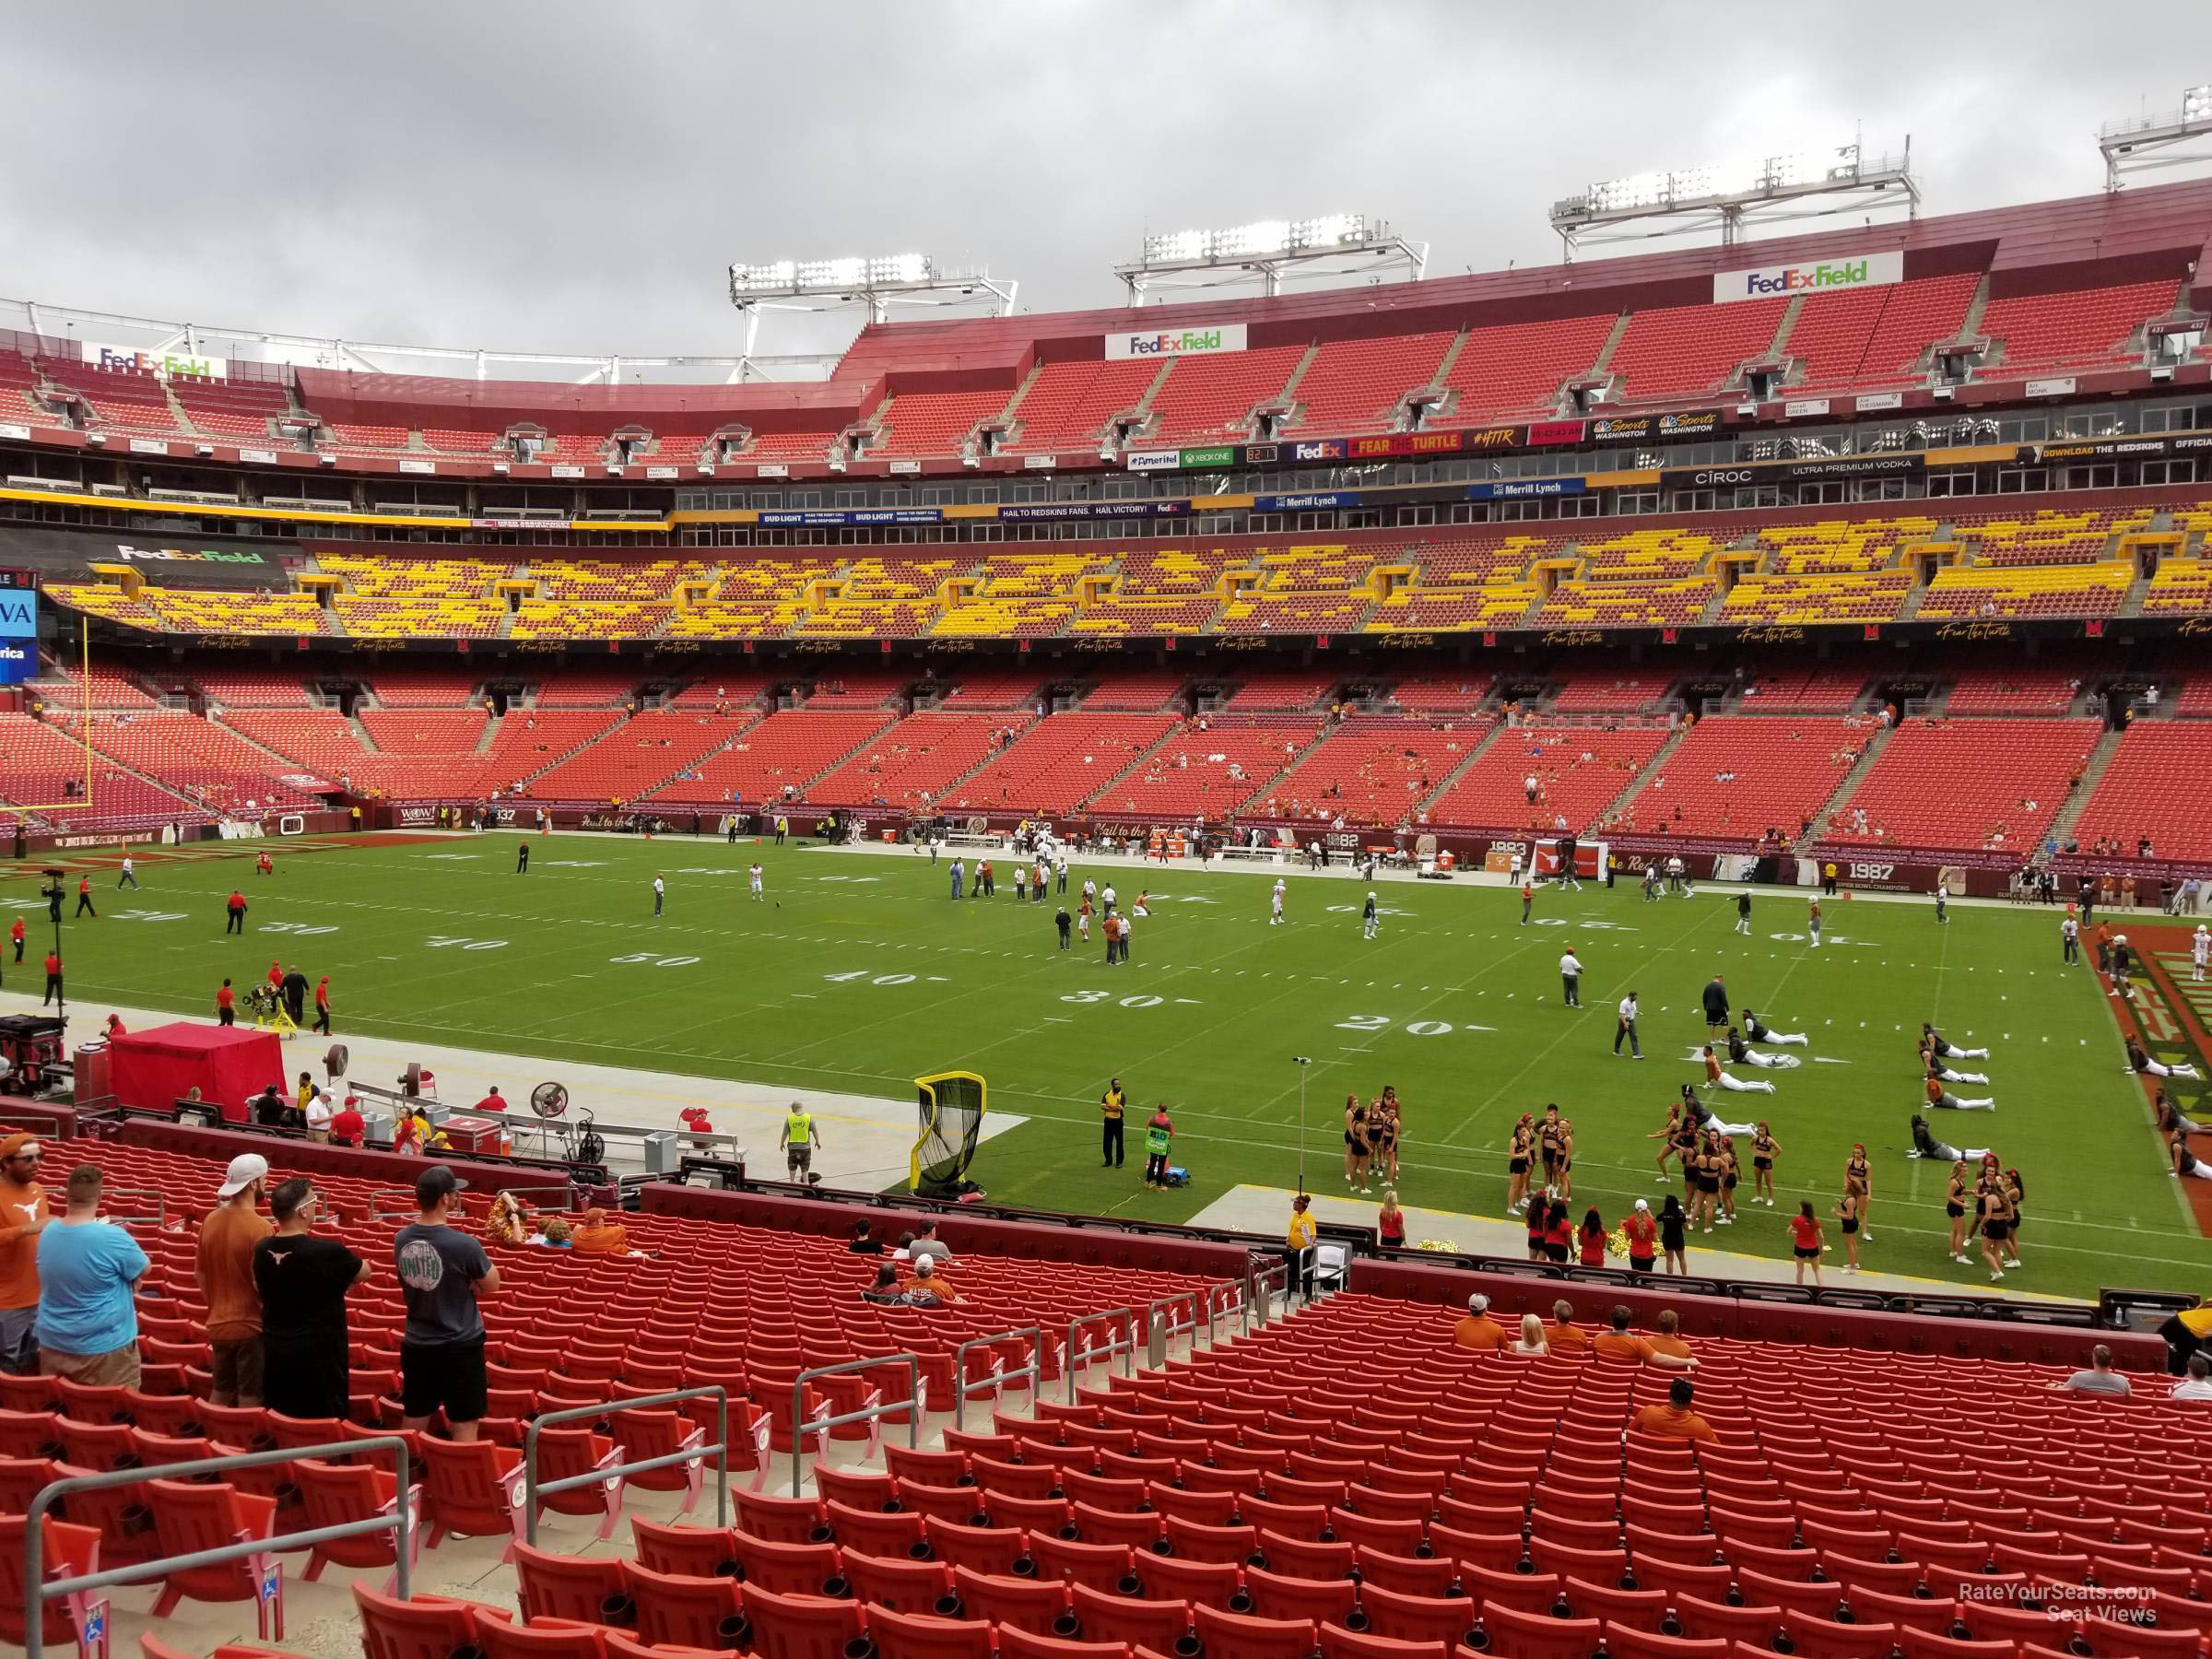 section 239, row 1 seat view  - fedexfield